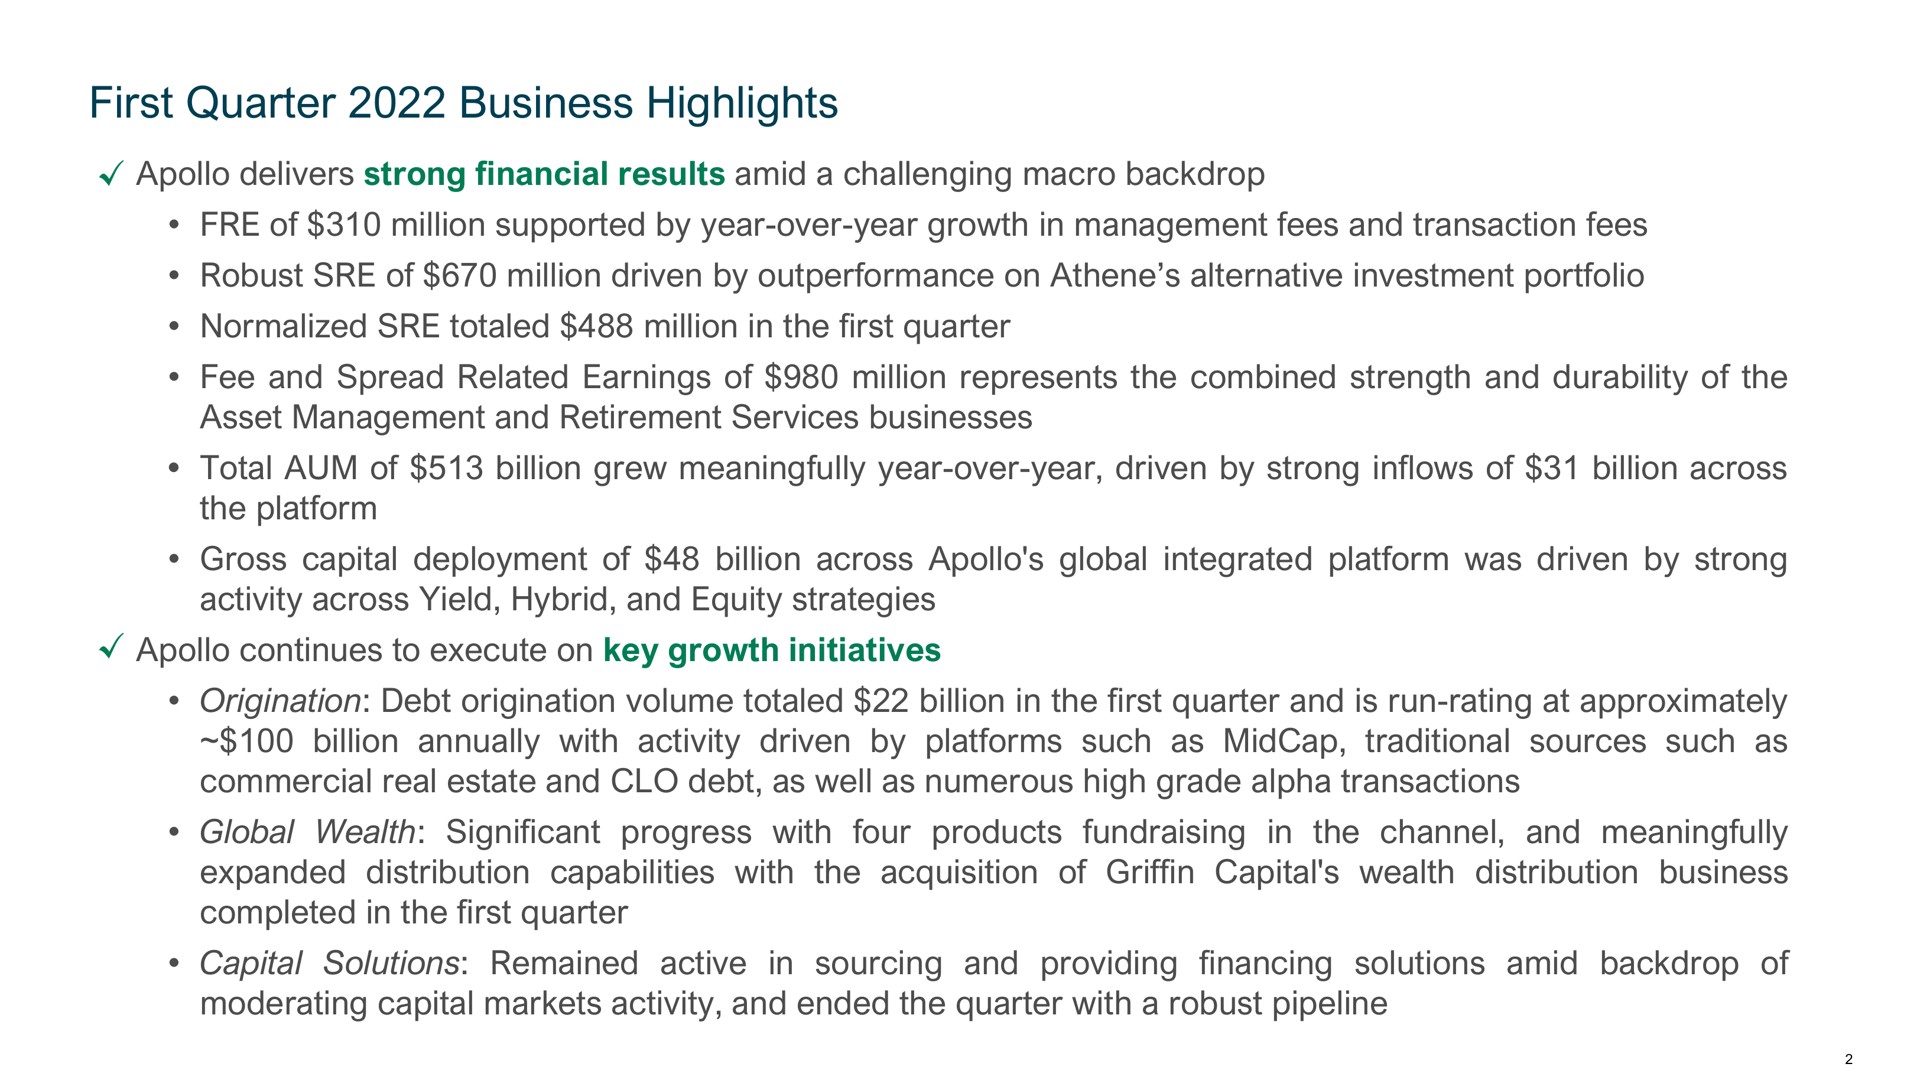 first quarter business highlights delivers strong financial results amid a challenging macro backdrop of million supported by year over year growth in management fees and transaction fees robust of million driven by on alternative investment portfolio normalized totaled million in the first quarter fee and spread related earnings of million represents the combined strength and durability of the asset management and retirement services businesses total aum of billion grew meaningfully year over year driven by strong inflows of billion across the platform gross capital deployment of billion across global integrated platform was driven by strong activity across yield hybrid and equity strategies continues to execute on key growth initiatives origination debt origination volume totaled billion in the first quarter and is run rating at approximately billion annually with activity driven by platforms such as traditional sources such as commercial real estate and debt as well as numerous high grade alpha transactions global wealth significant progress with four products in the channel and meaningfully expanded distribution capabilities with the acquisition of griffin capital wealth distribution business completed in the first quarter capital solutions remained active in sourcing and providing financing solutions amid backdrop of moderating capital markets activity and ended the quarter with a robust pipeline | Apollo Global Management